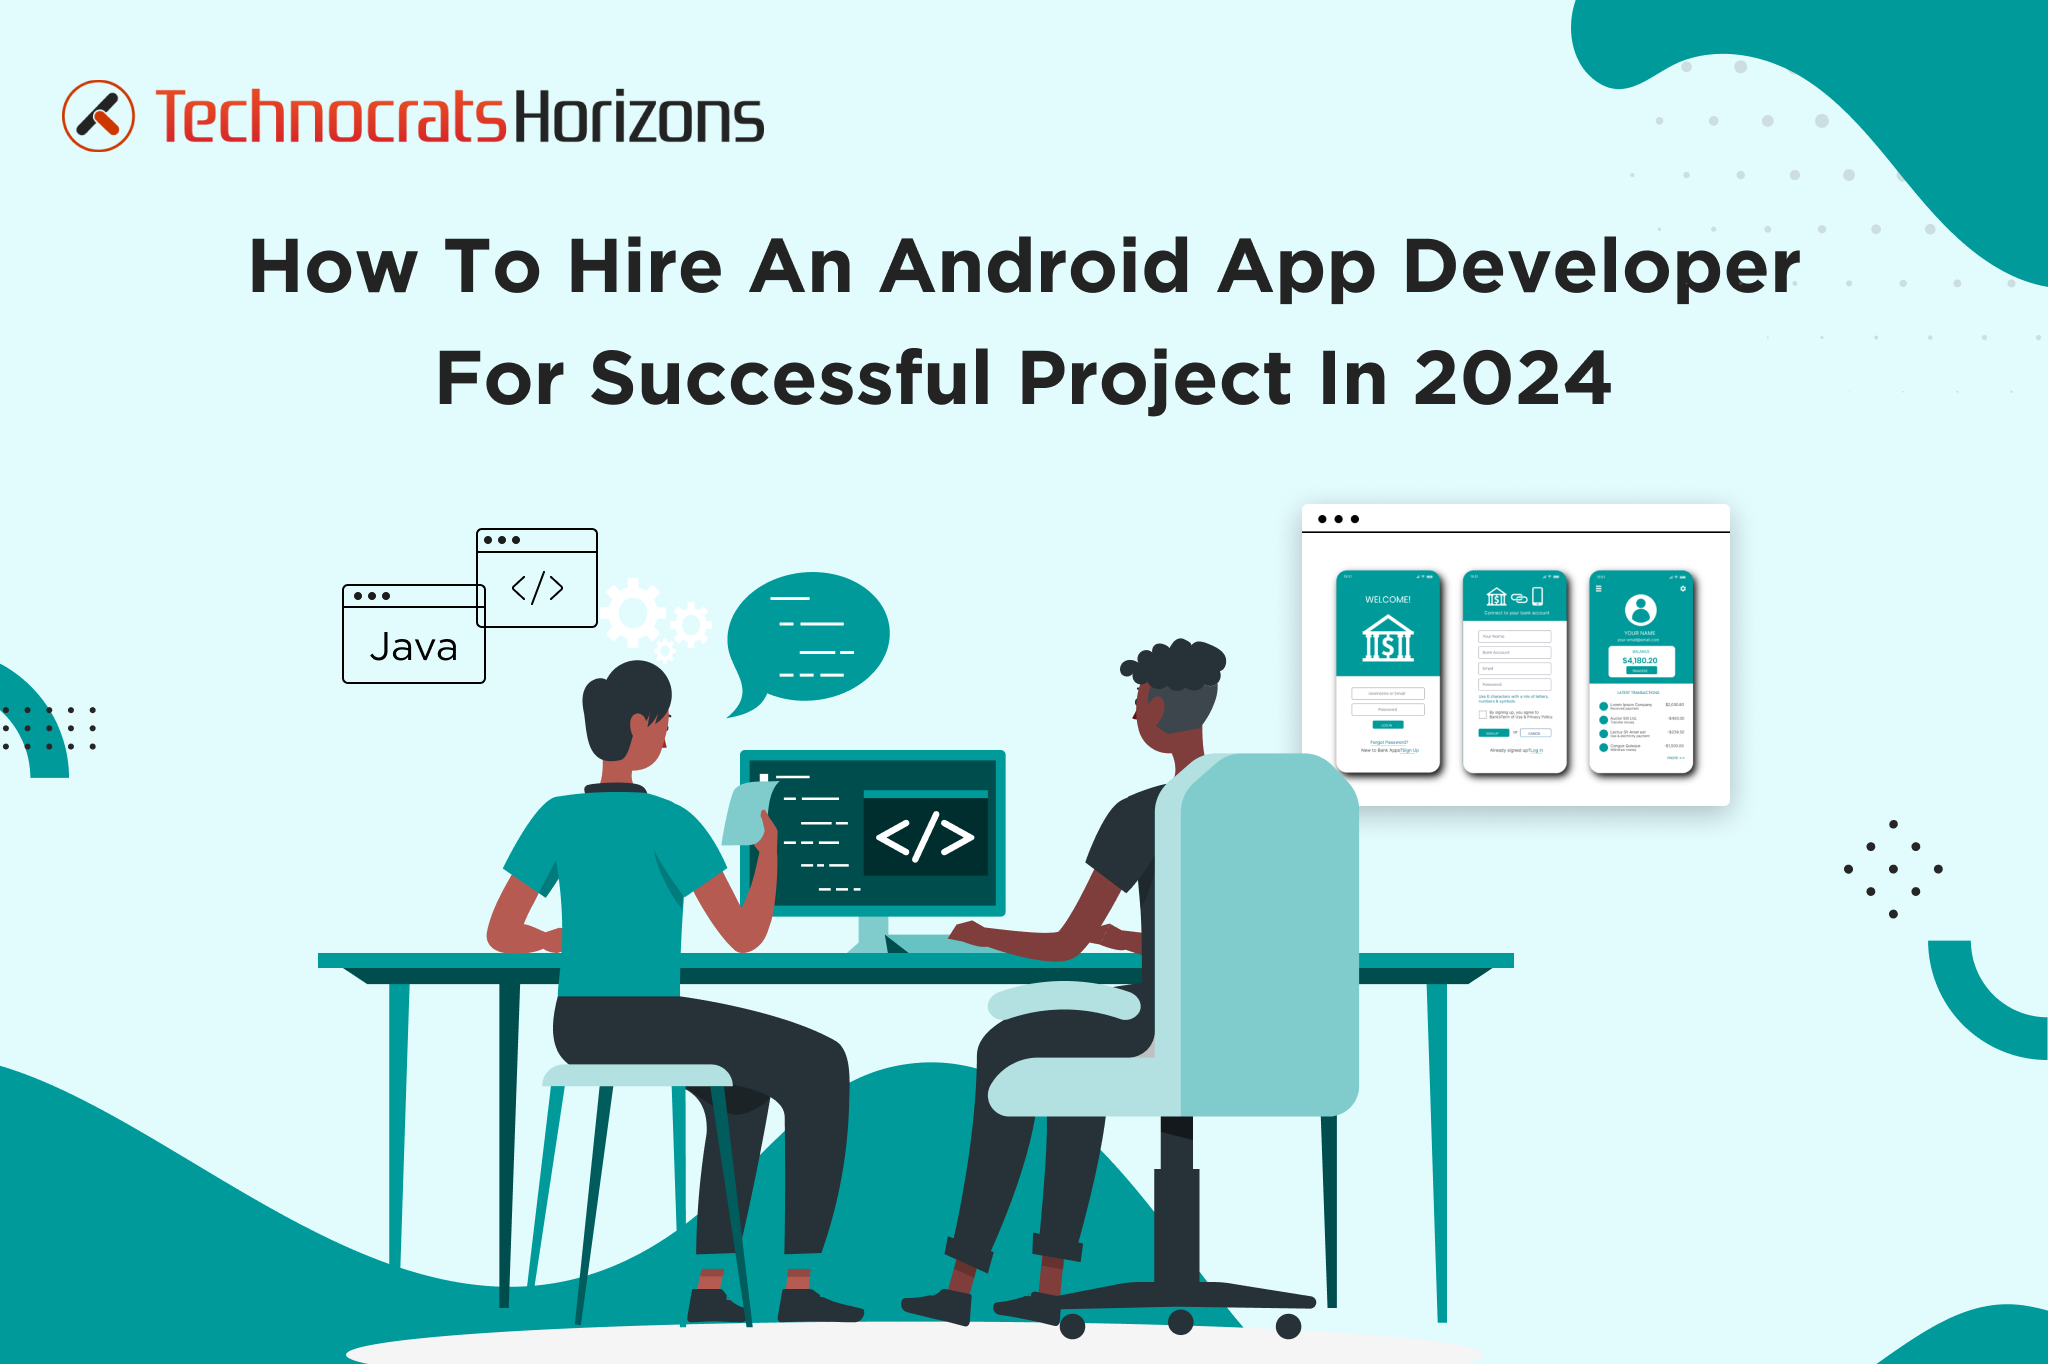 How To Hire Android App Developers For Successful App Project in 2024?